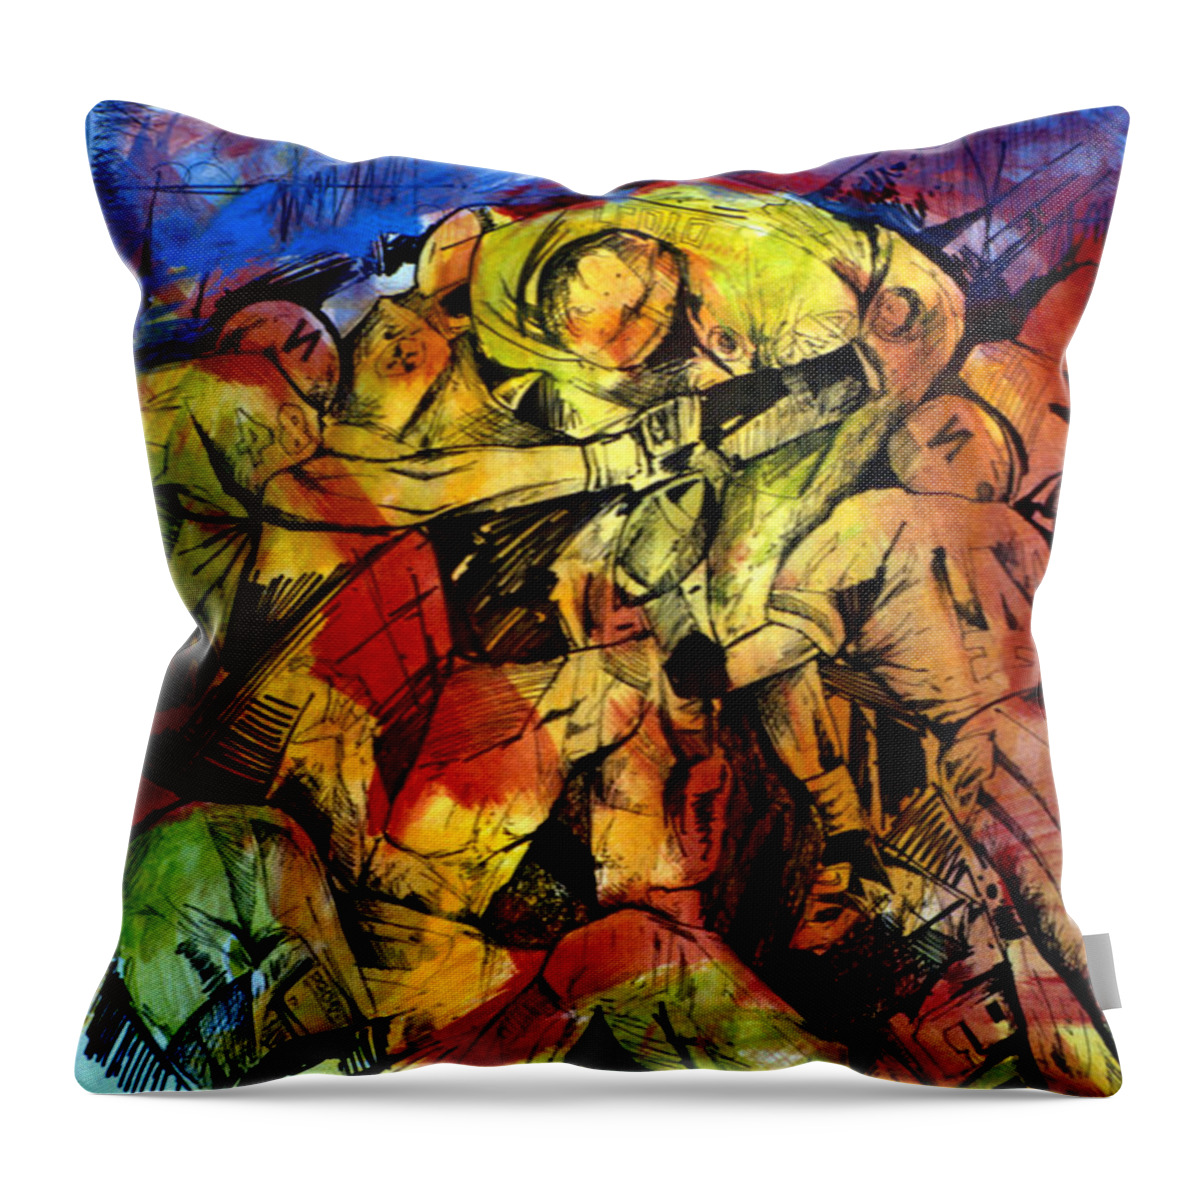  Throw Pillow featuring the painting Football Cluster by John Gholson